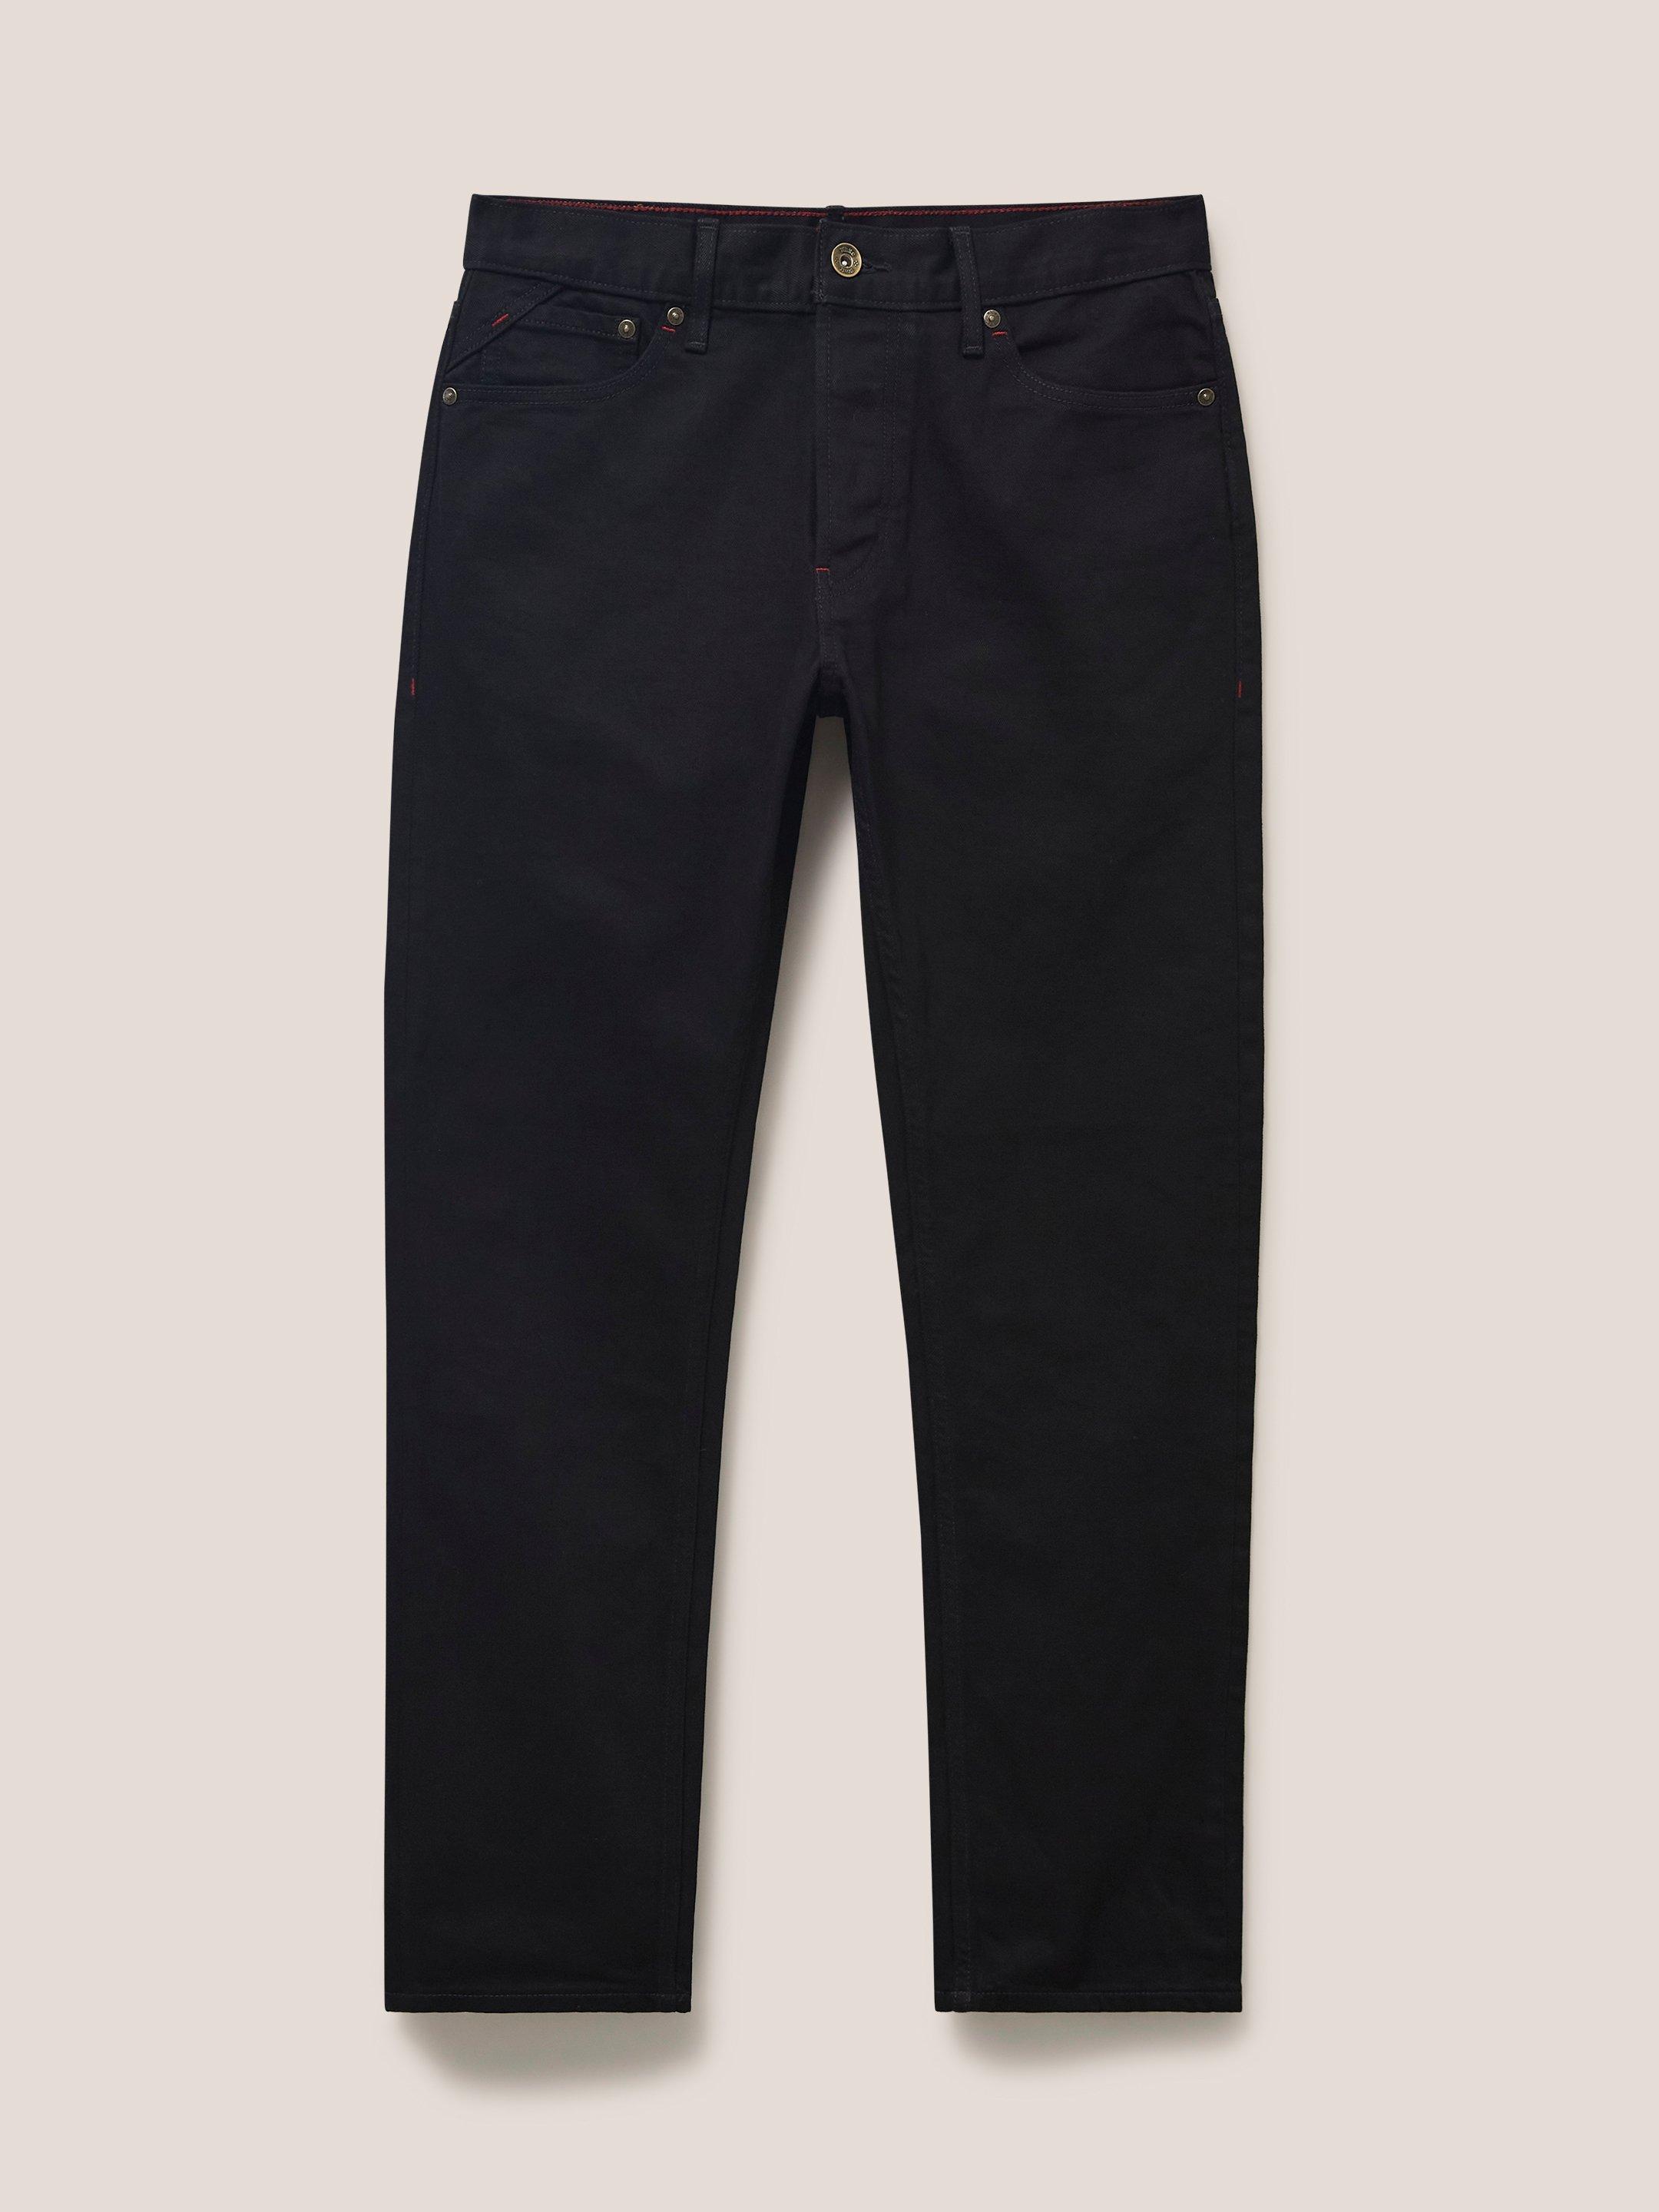 Harwood Straight Jean in PURE BLK - FLAT FRONT